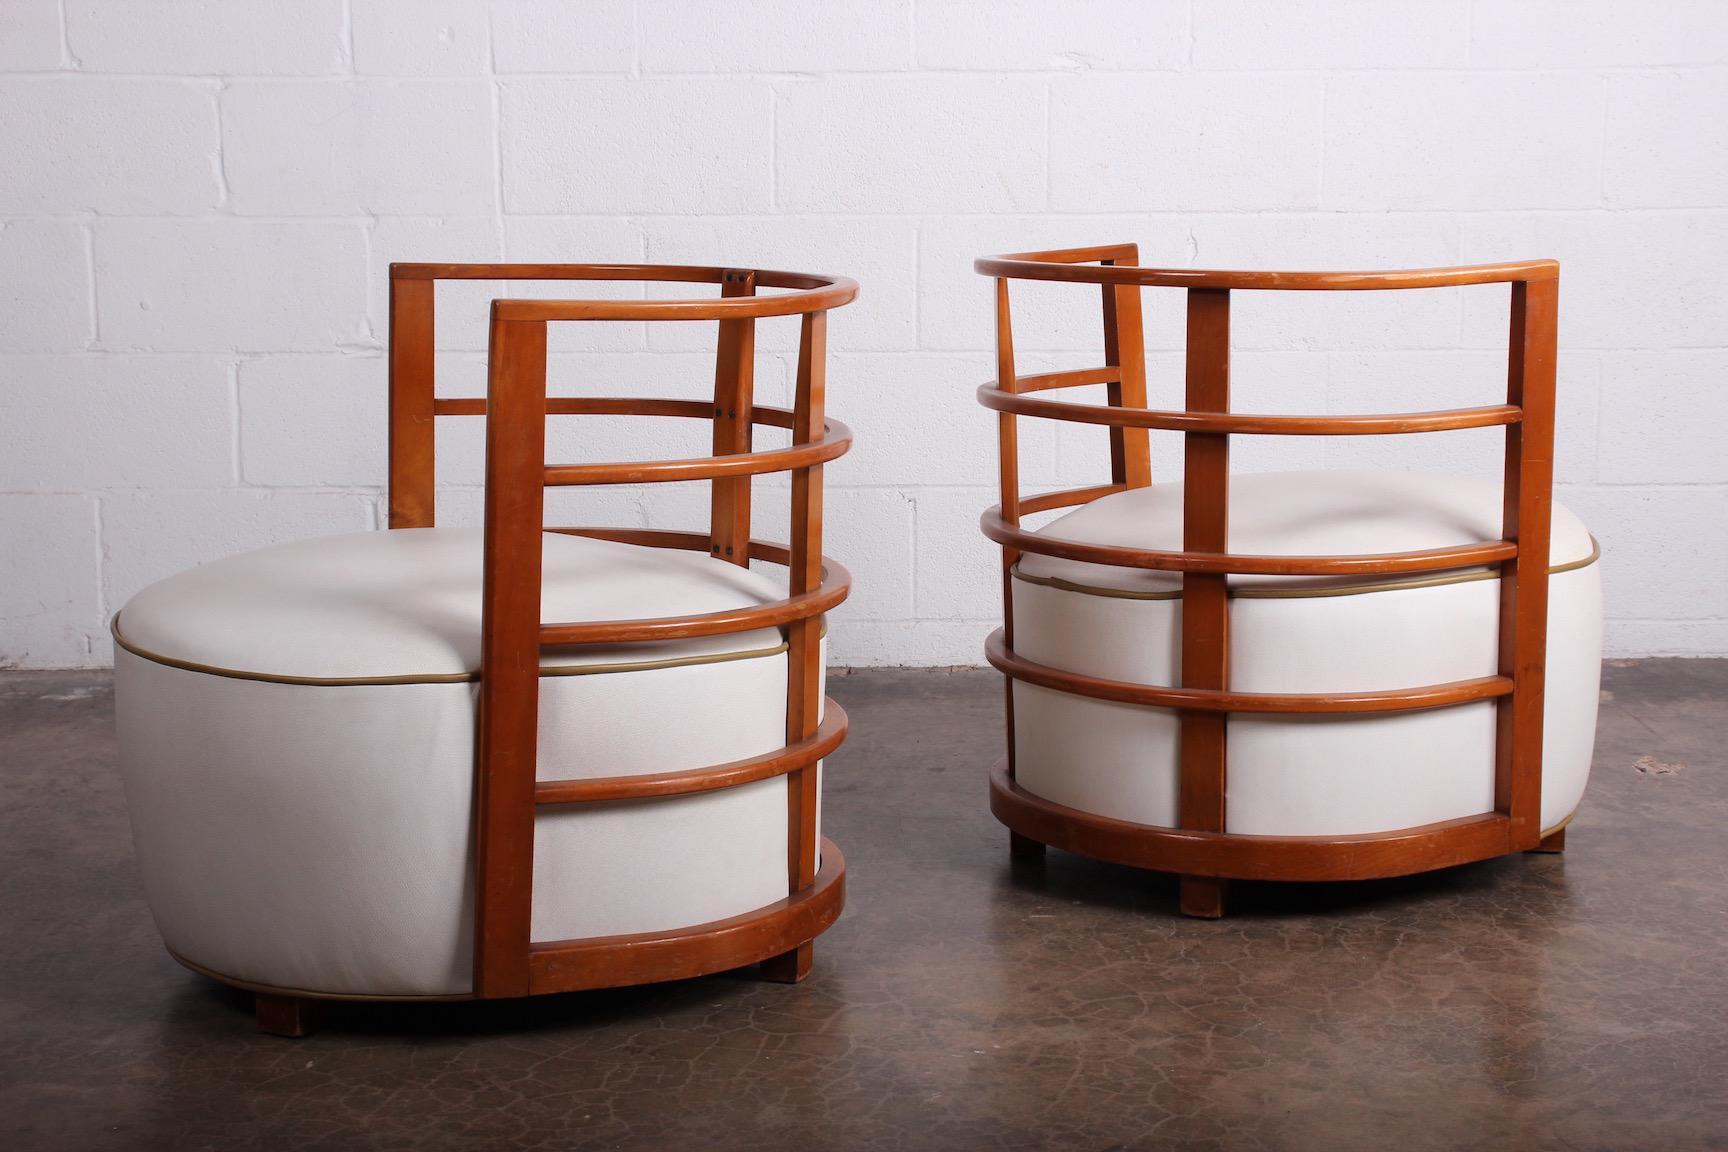 A rare pair of model 3451 chairs designed by Gilbert Rohde for Herman Miller in 1934.